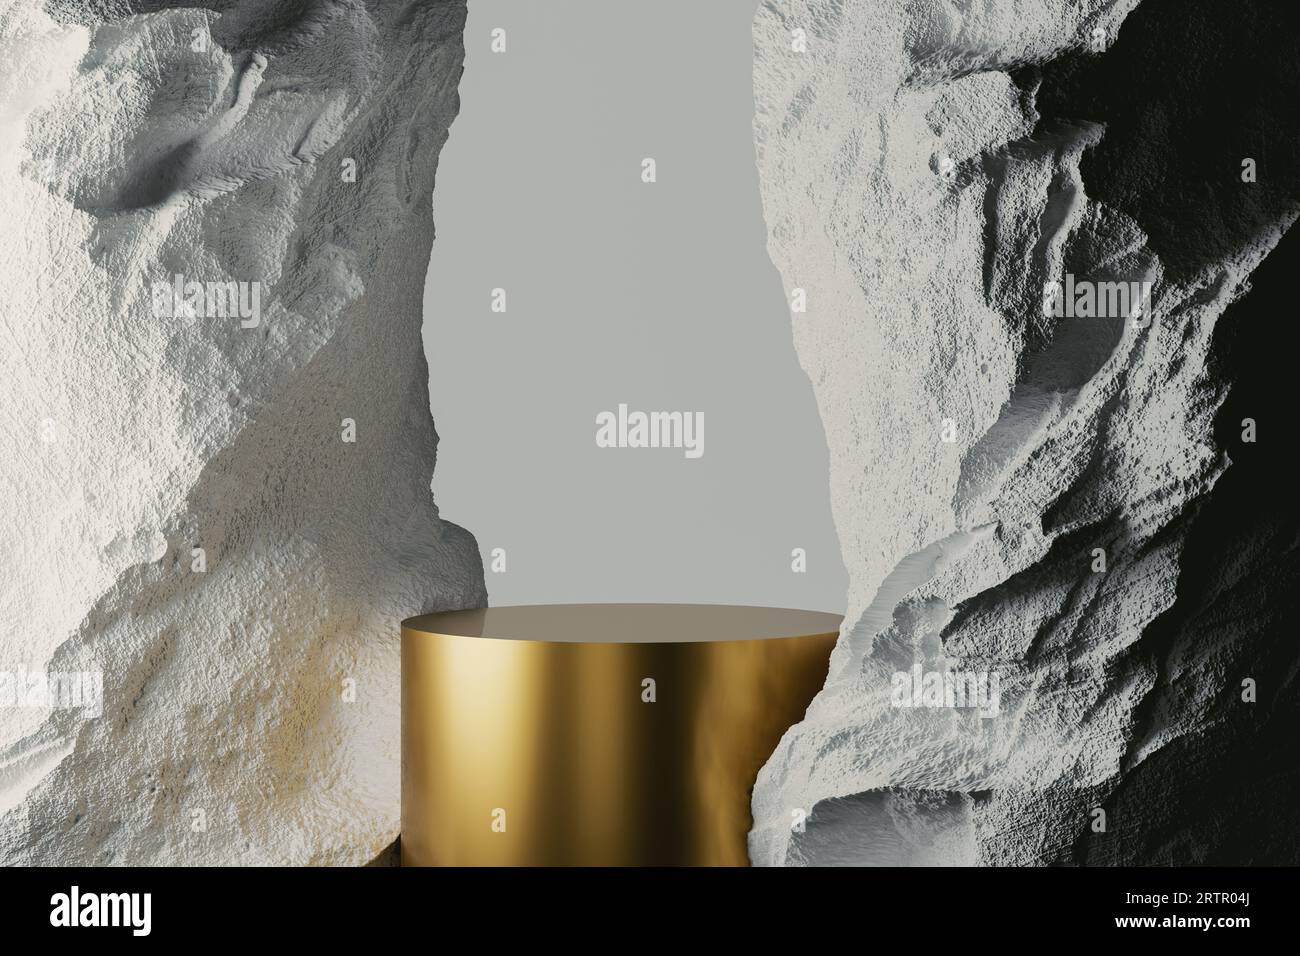 3d presentation pedestal between two white rocks. 3d rendering of mockup of presentation podium for display or advertising purposes Stock Photo